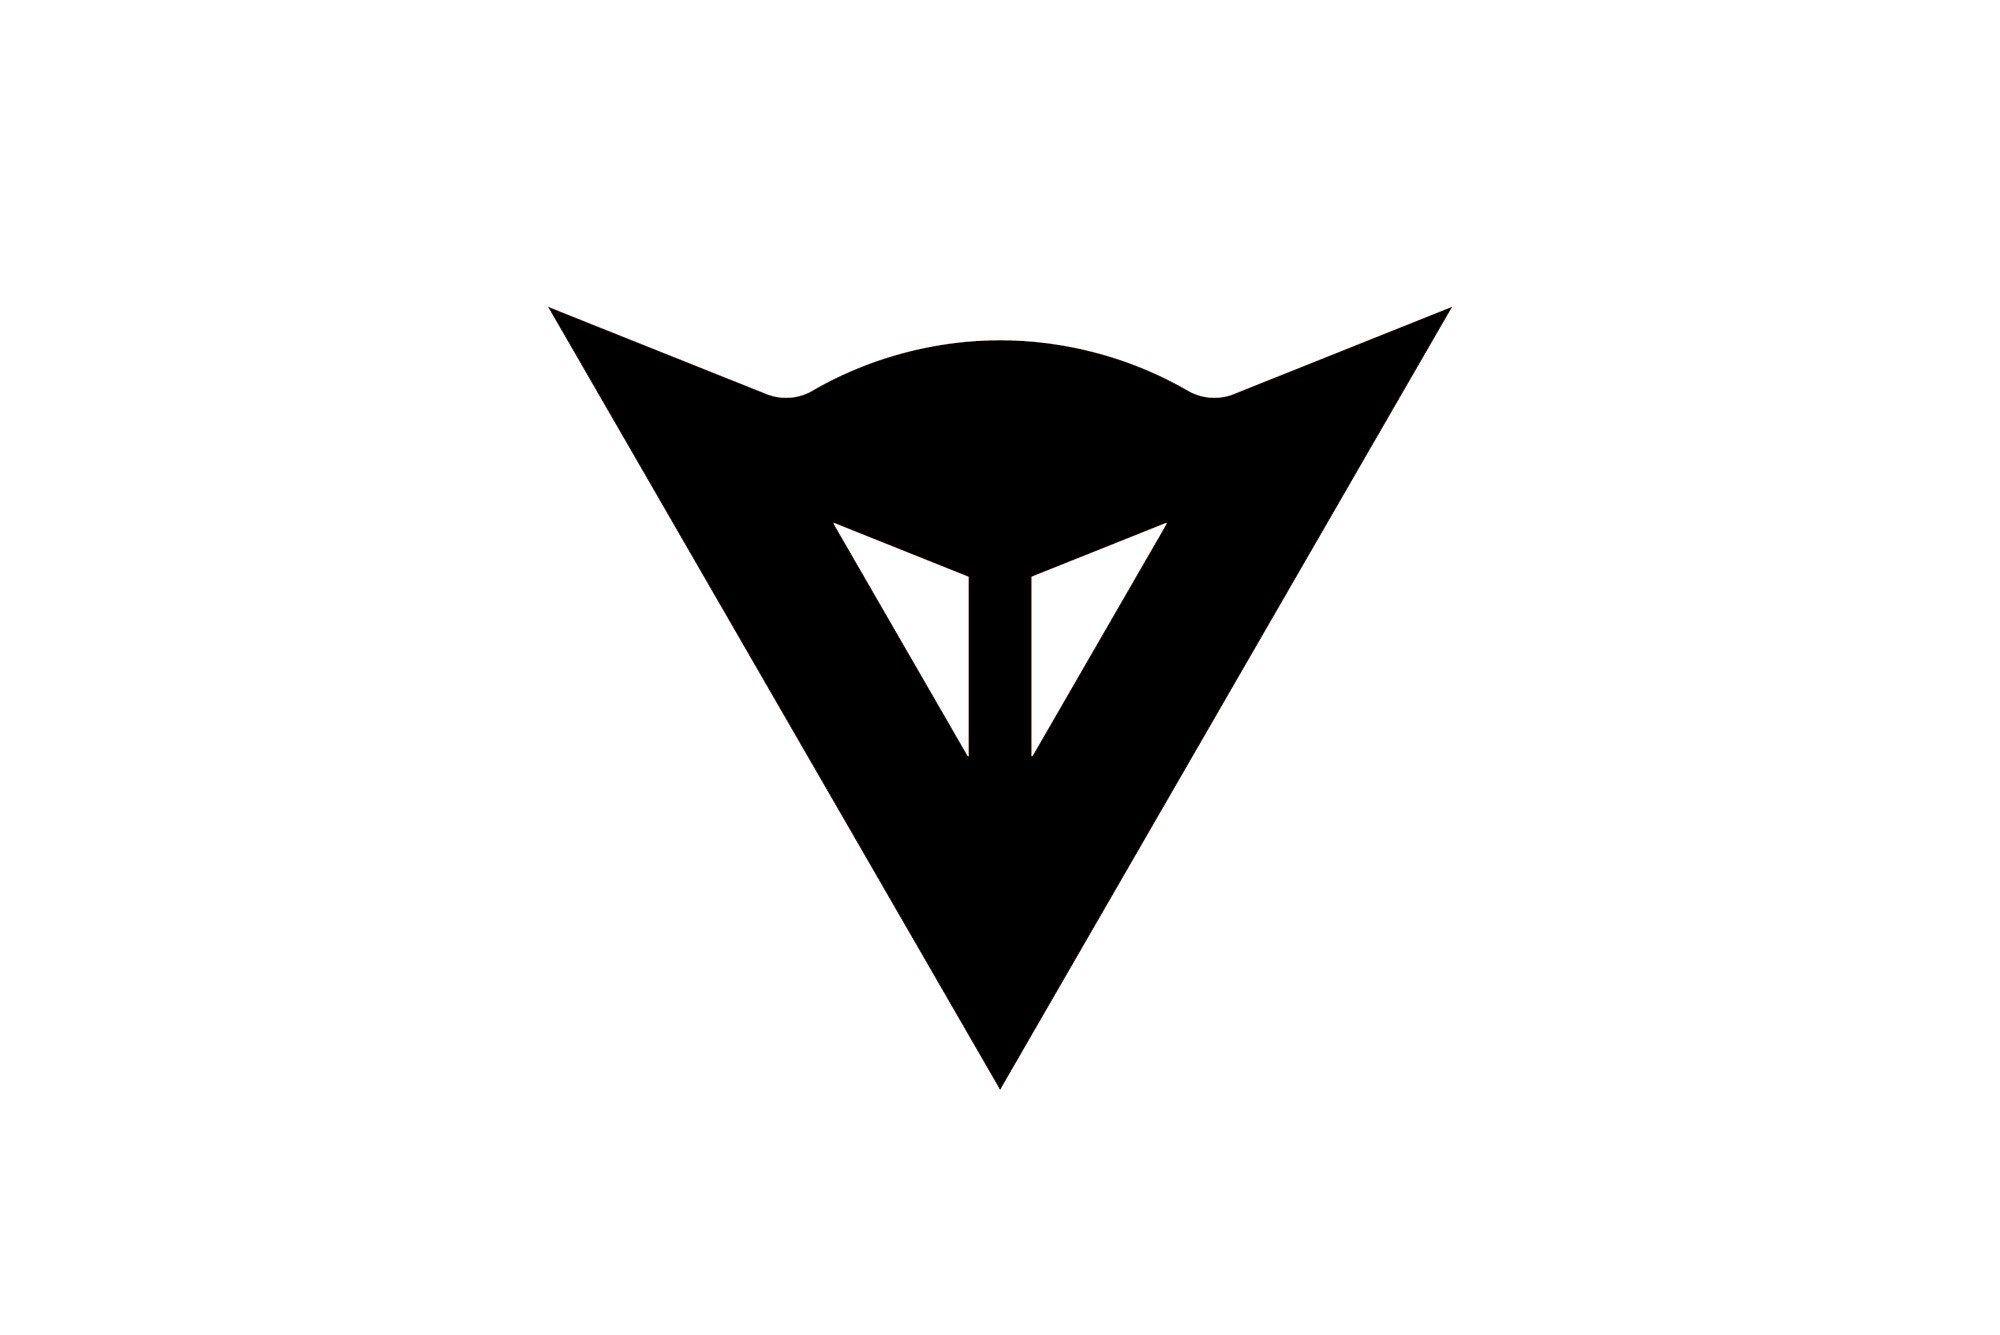 Investcorp Logo - Investcorp Buys 80% of Dainese for €130 Million - Asphalt & Rubber